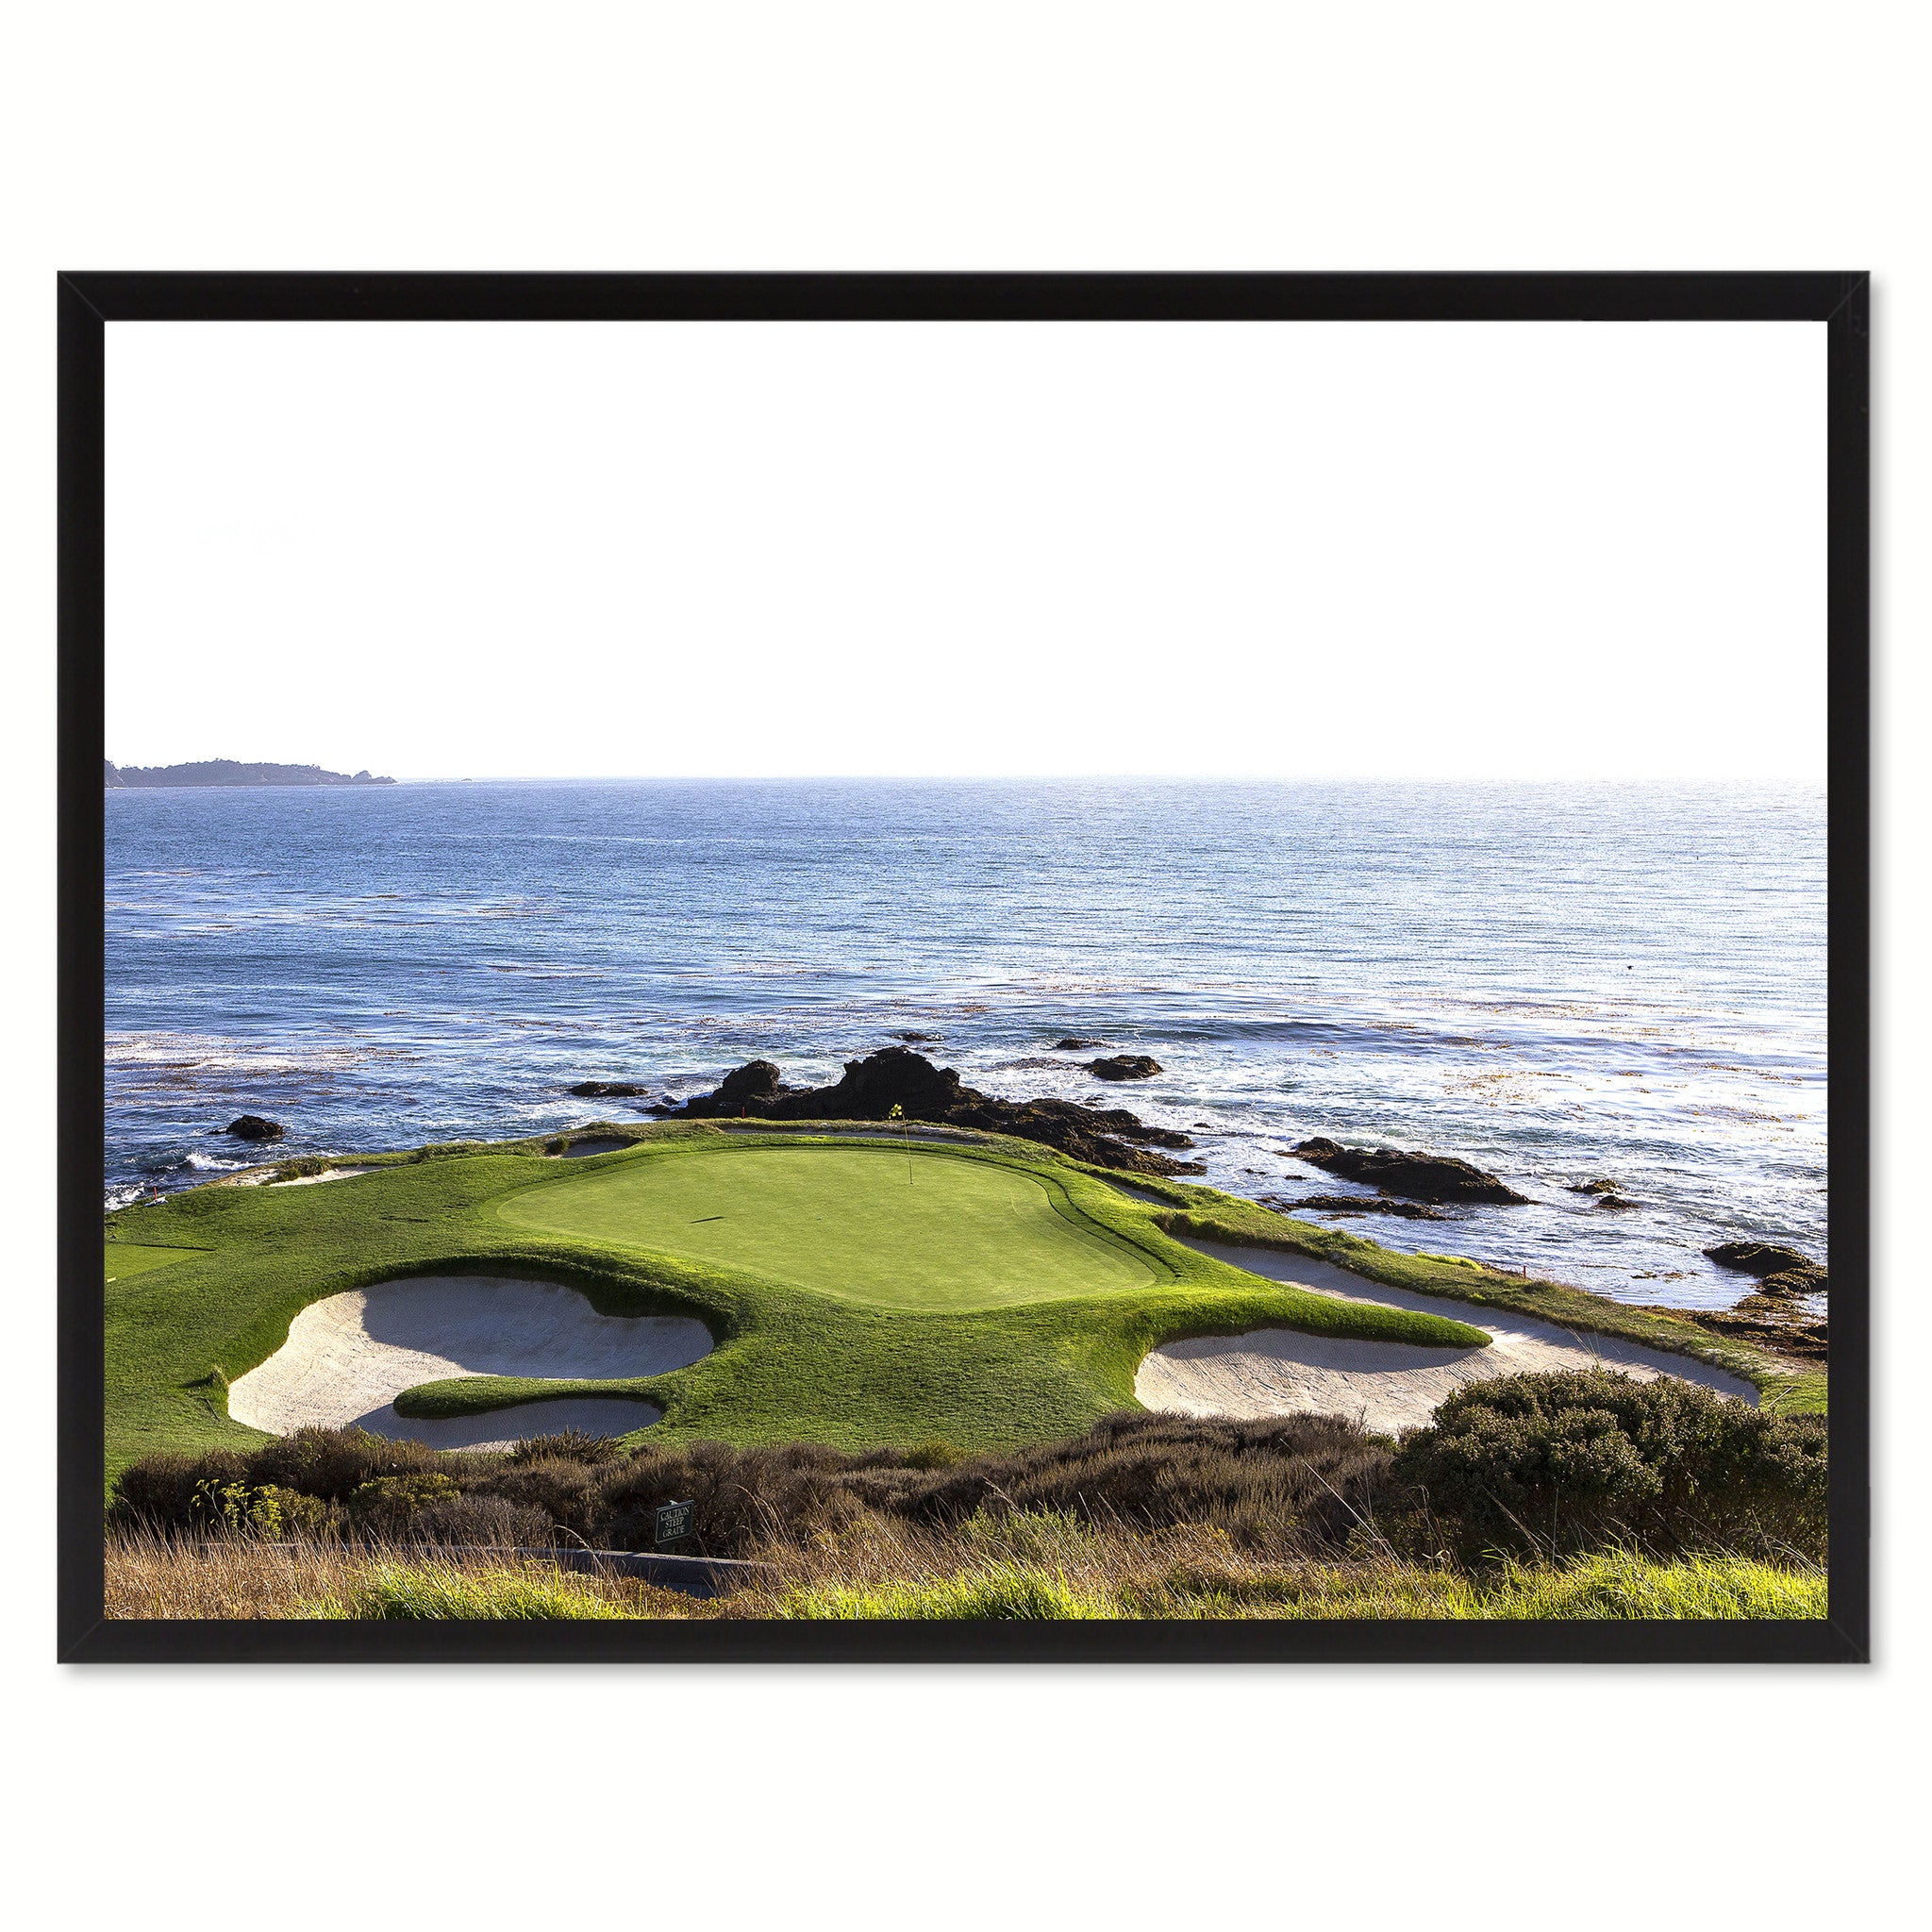 Pebble Beach Golf Course Photo Canvas Print Pictures Frames Home Décor Wall Art Gifts